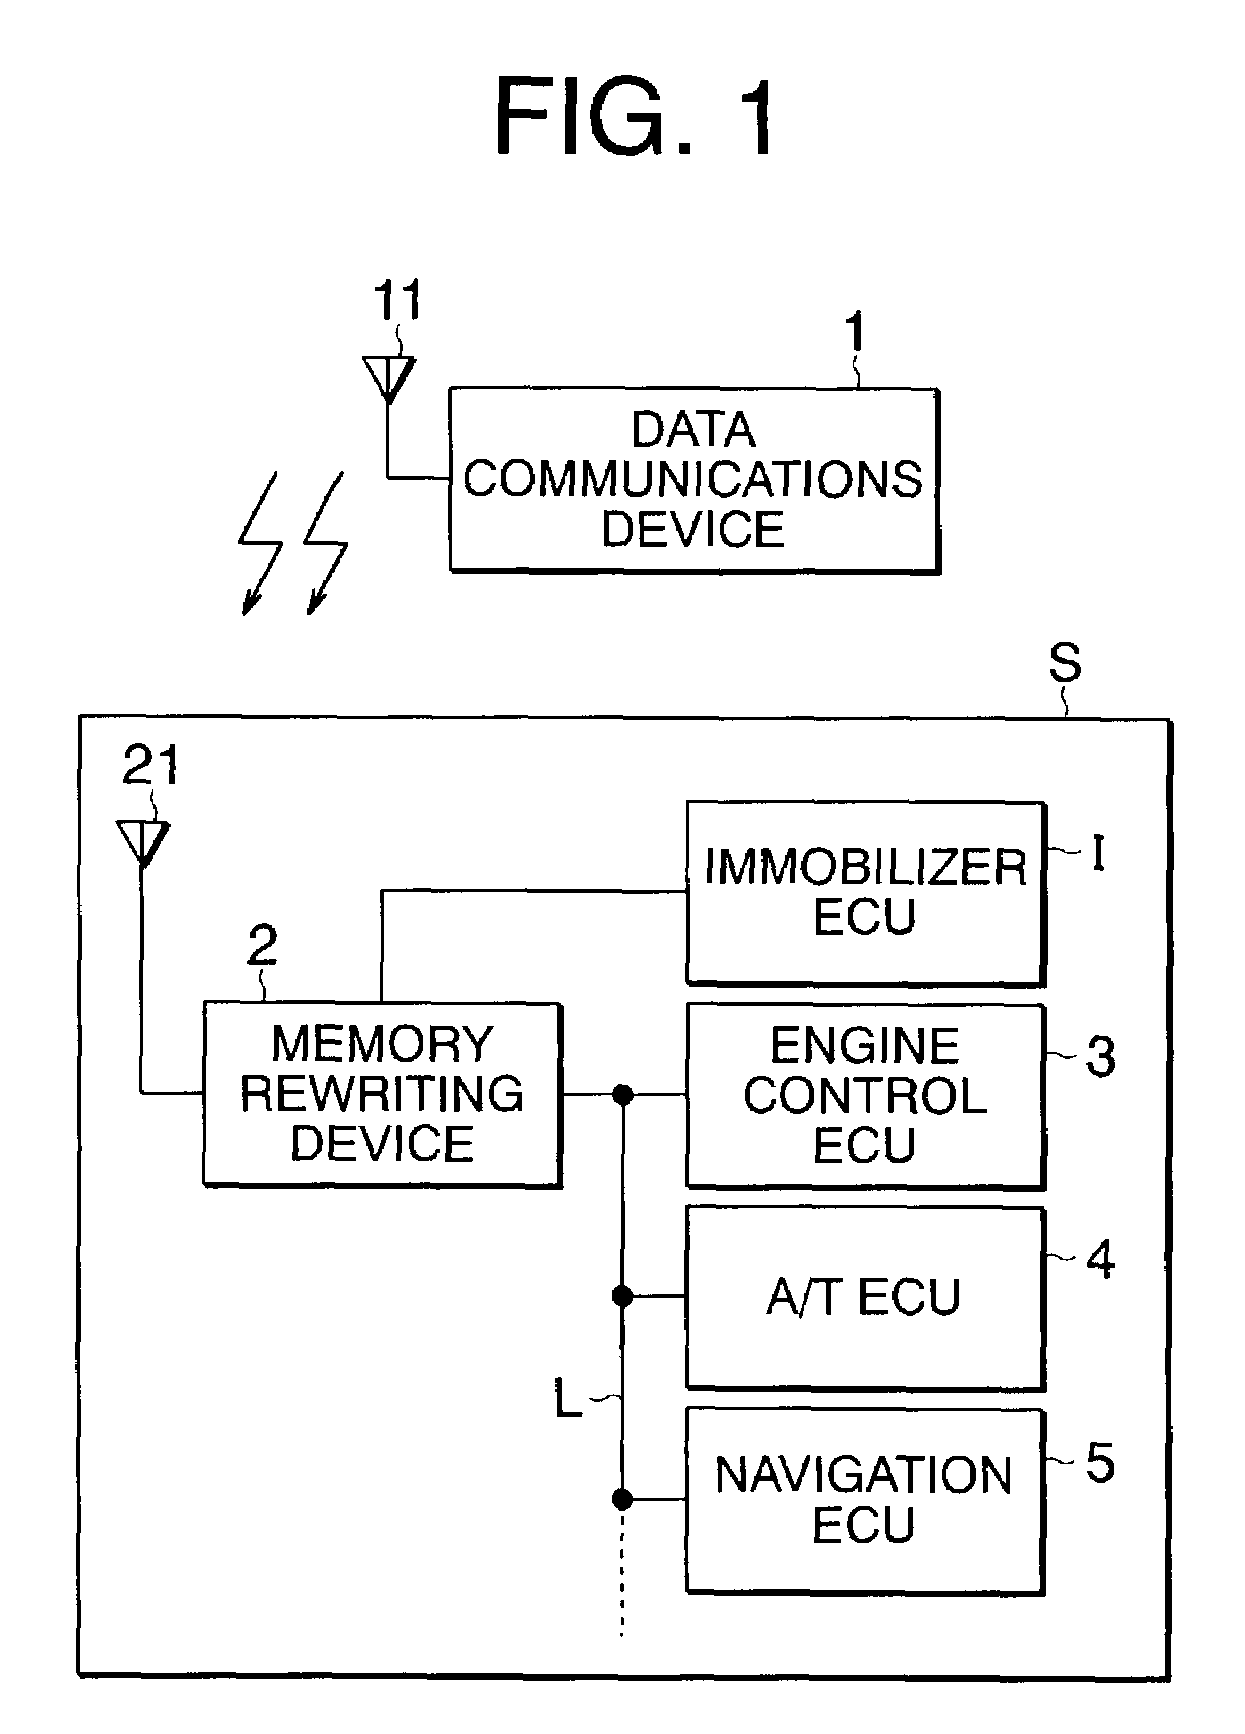 Apparatus for rewriting a memory in a vehicle mounted ECU through communications